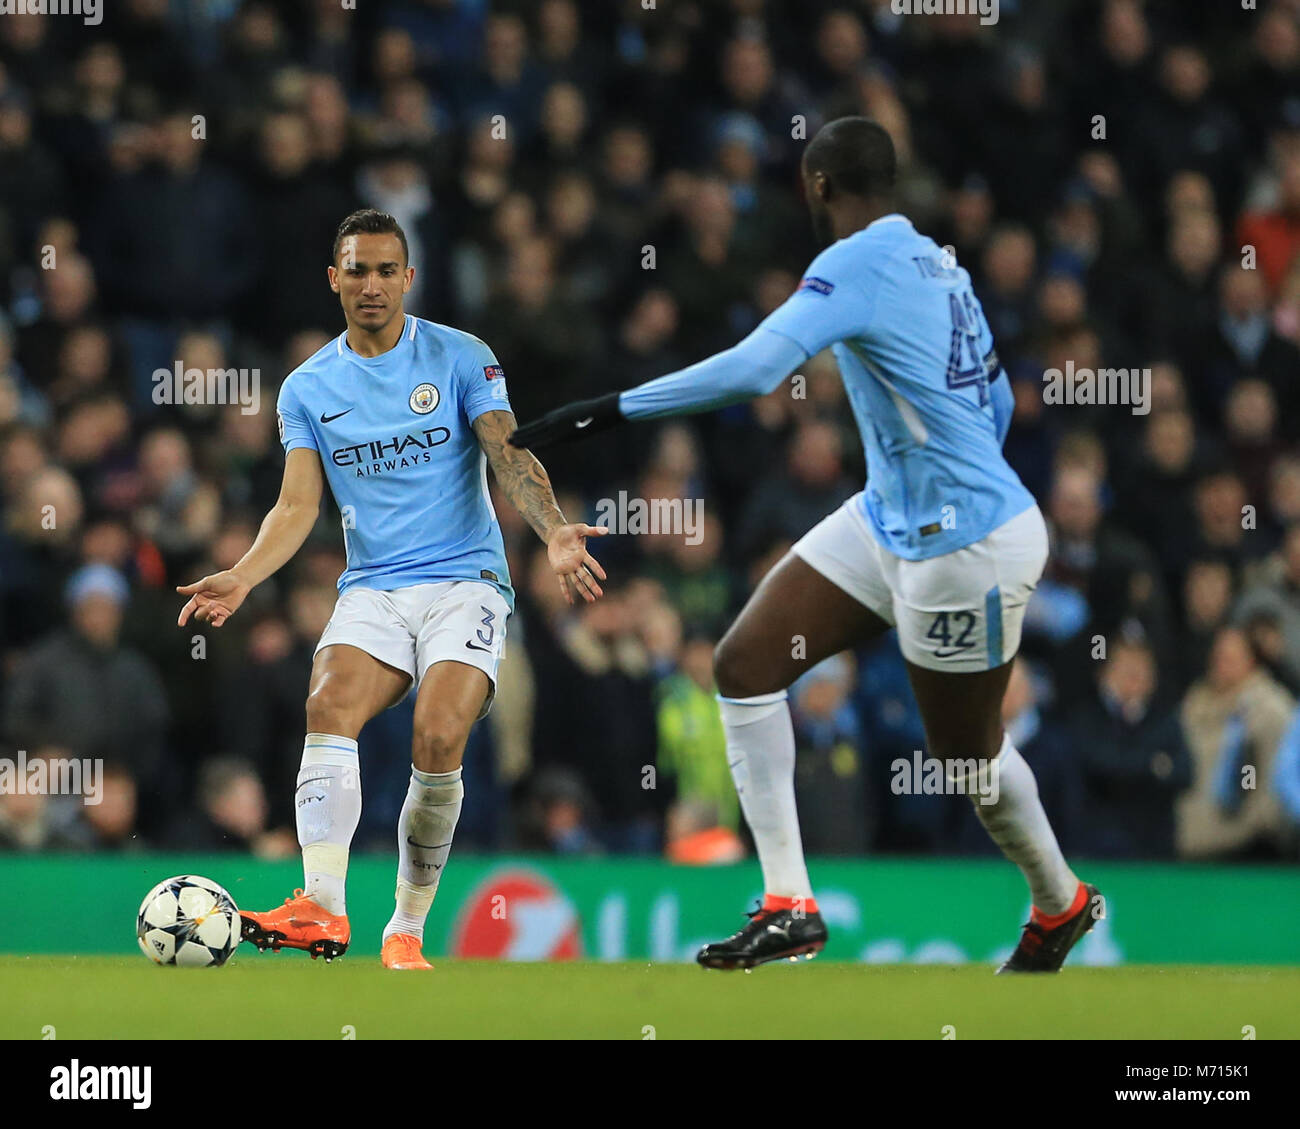 Manchester, UK. 7th March 2018 , Champions League Round of 16 leg 2, Manchester City versus FC Basel; Danilo #3 of Manchester City lays the ball on for Yaya Toure #42 of Manchester City Stock Photo